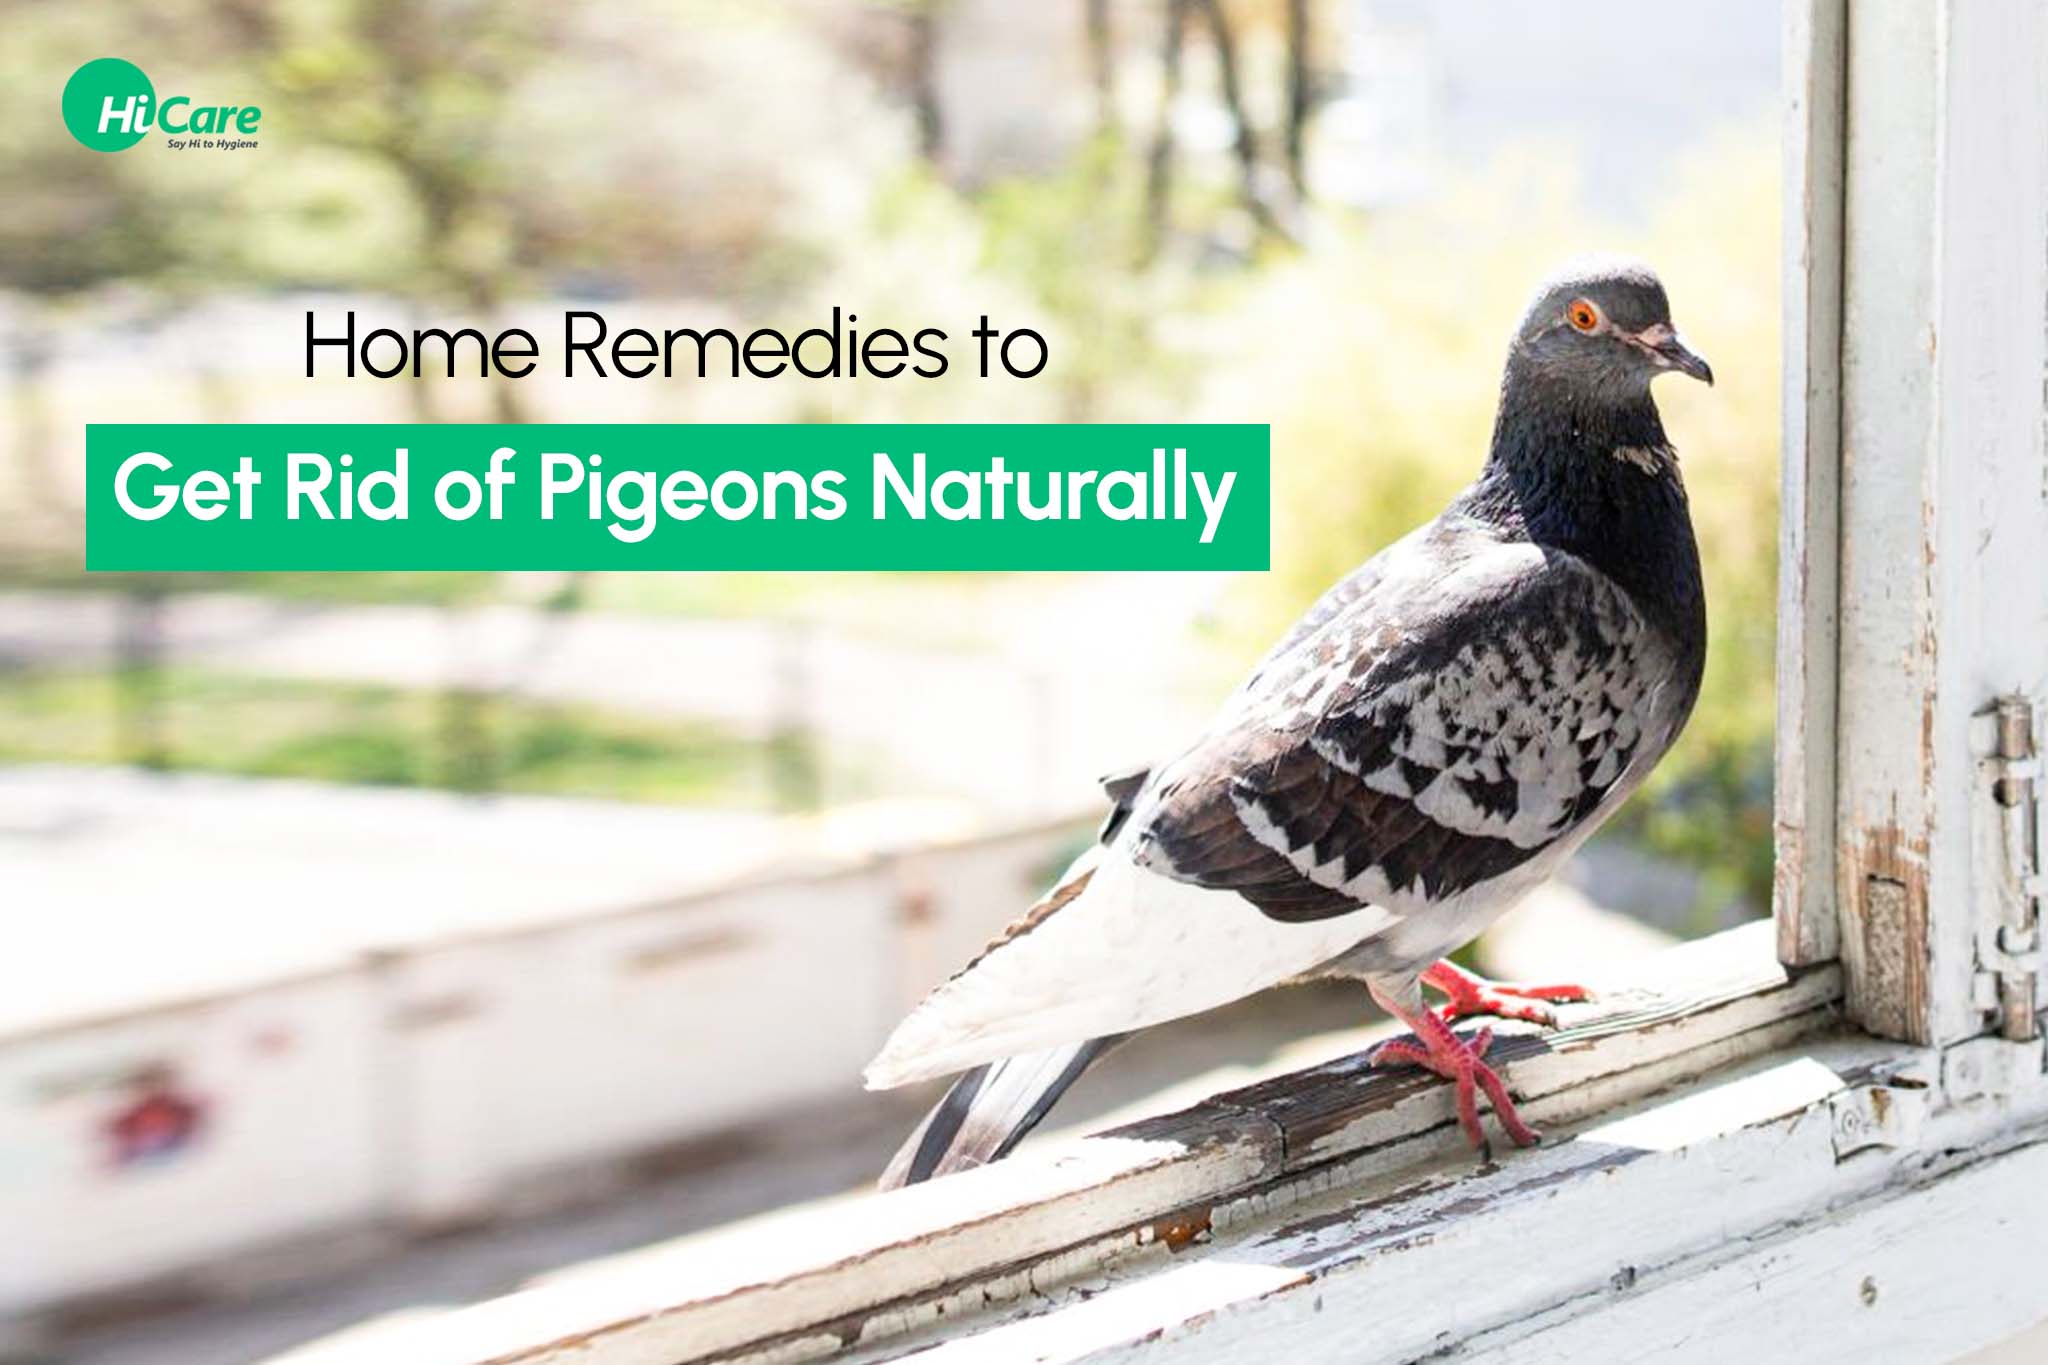 Home Remedies to Get Rid of Pigeons Naturally